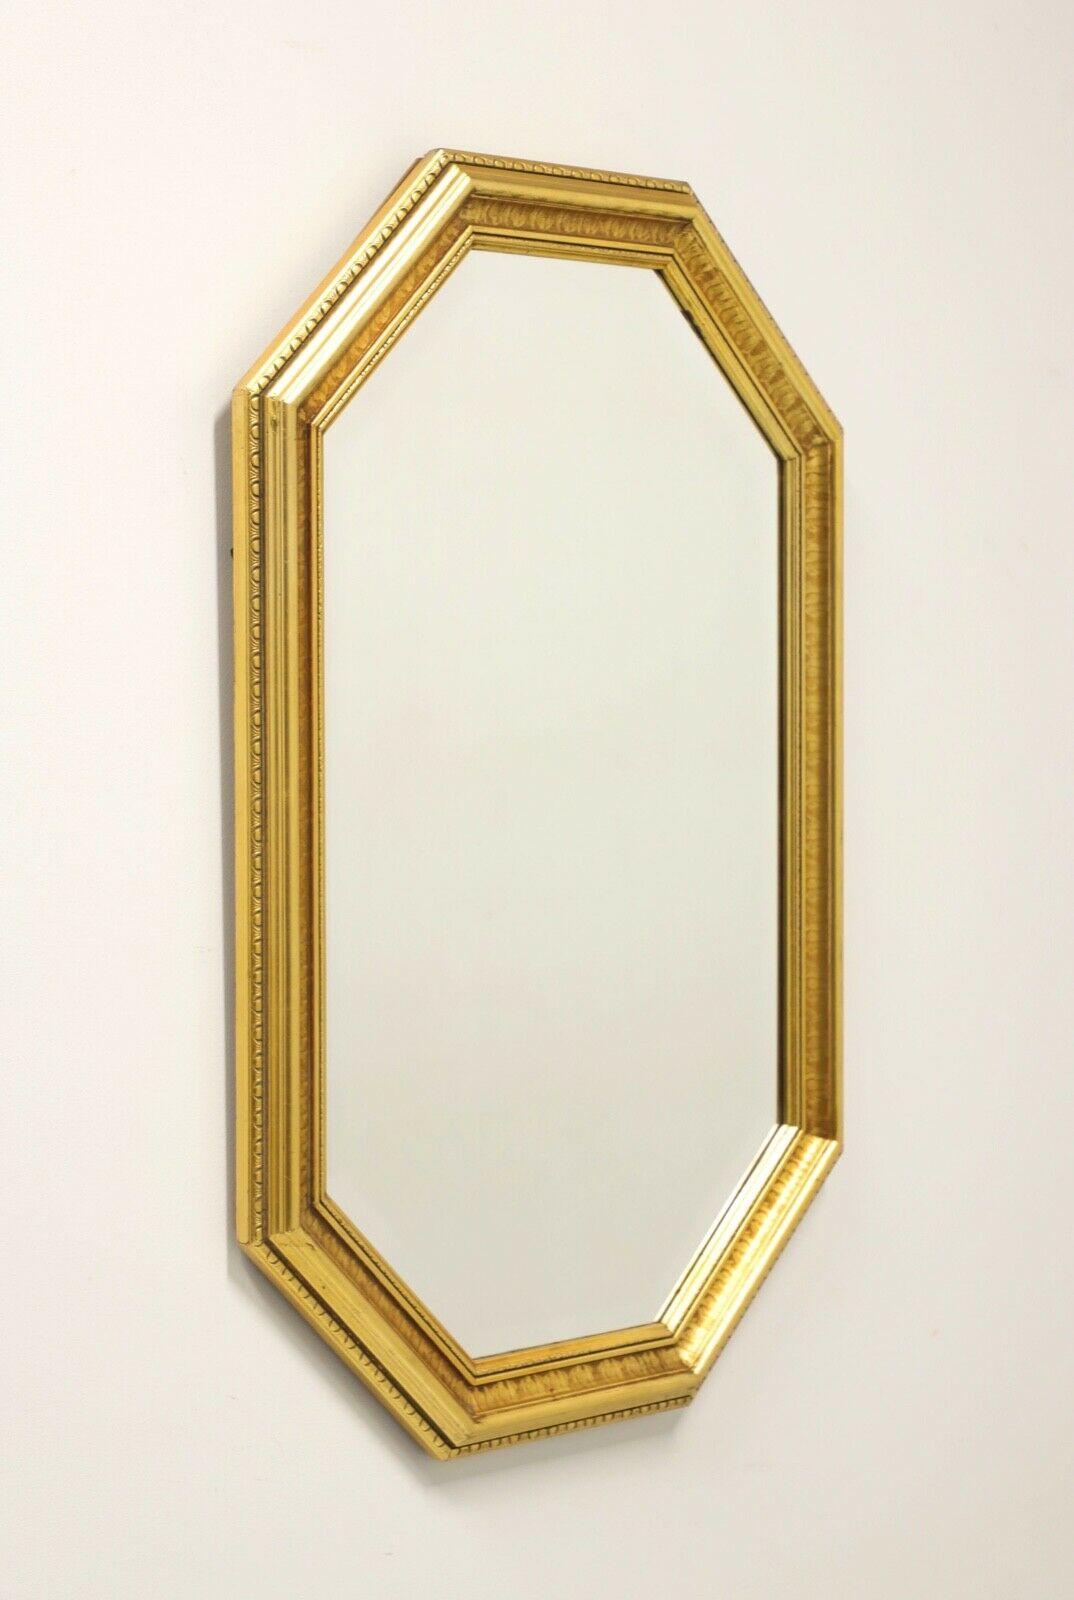 CAROLINA MIRROR Traditional Octagonal Beveled Wall Mirror in Gold Frame In Good Condition For Sale In Charlotte, NC